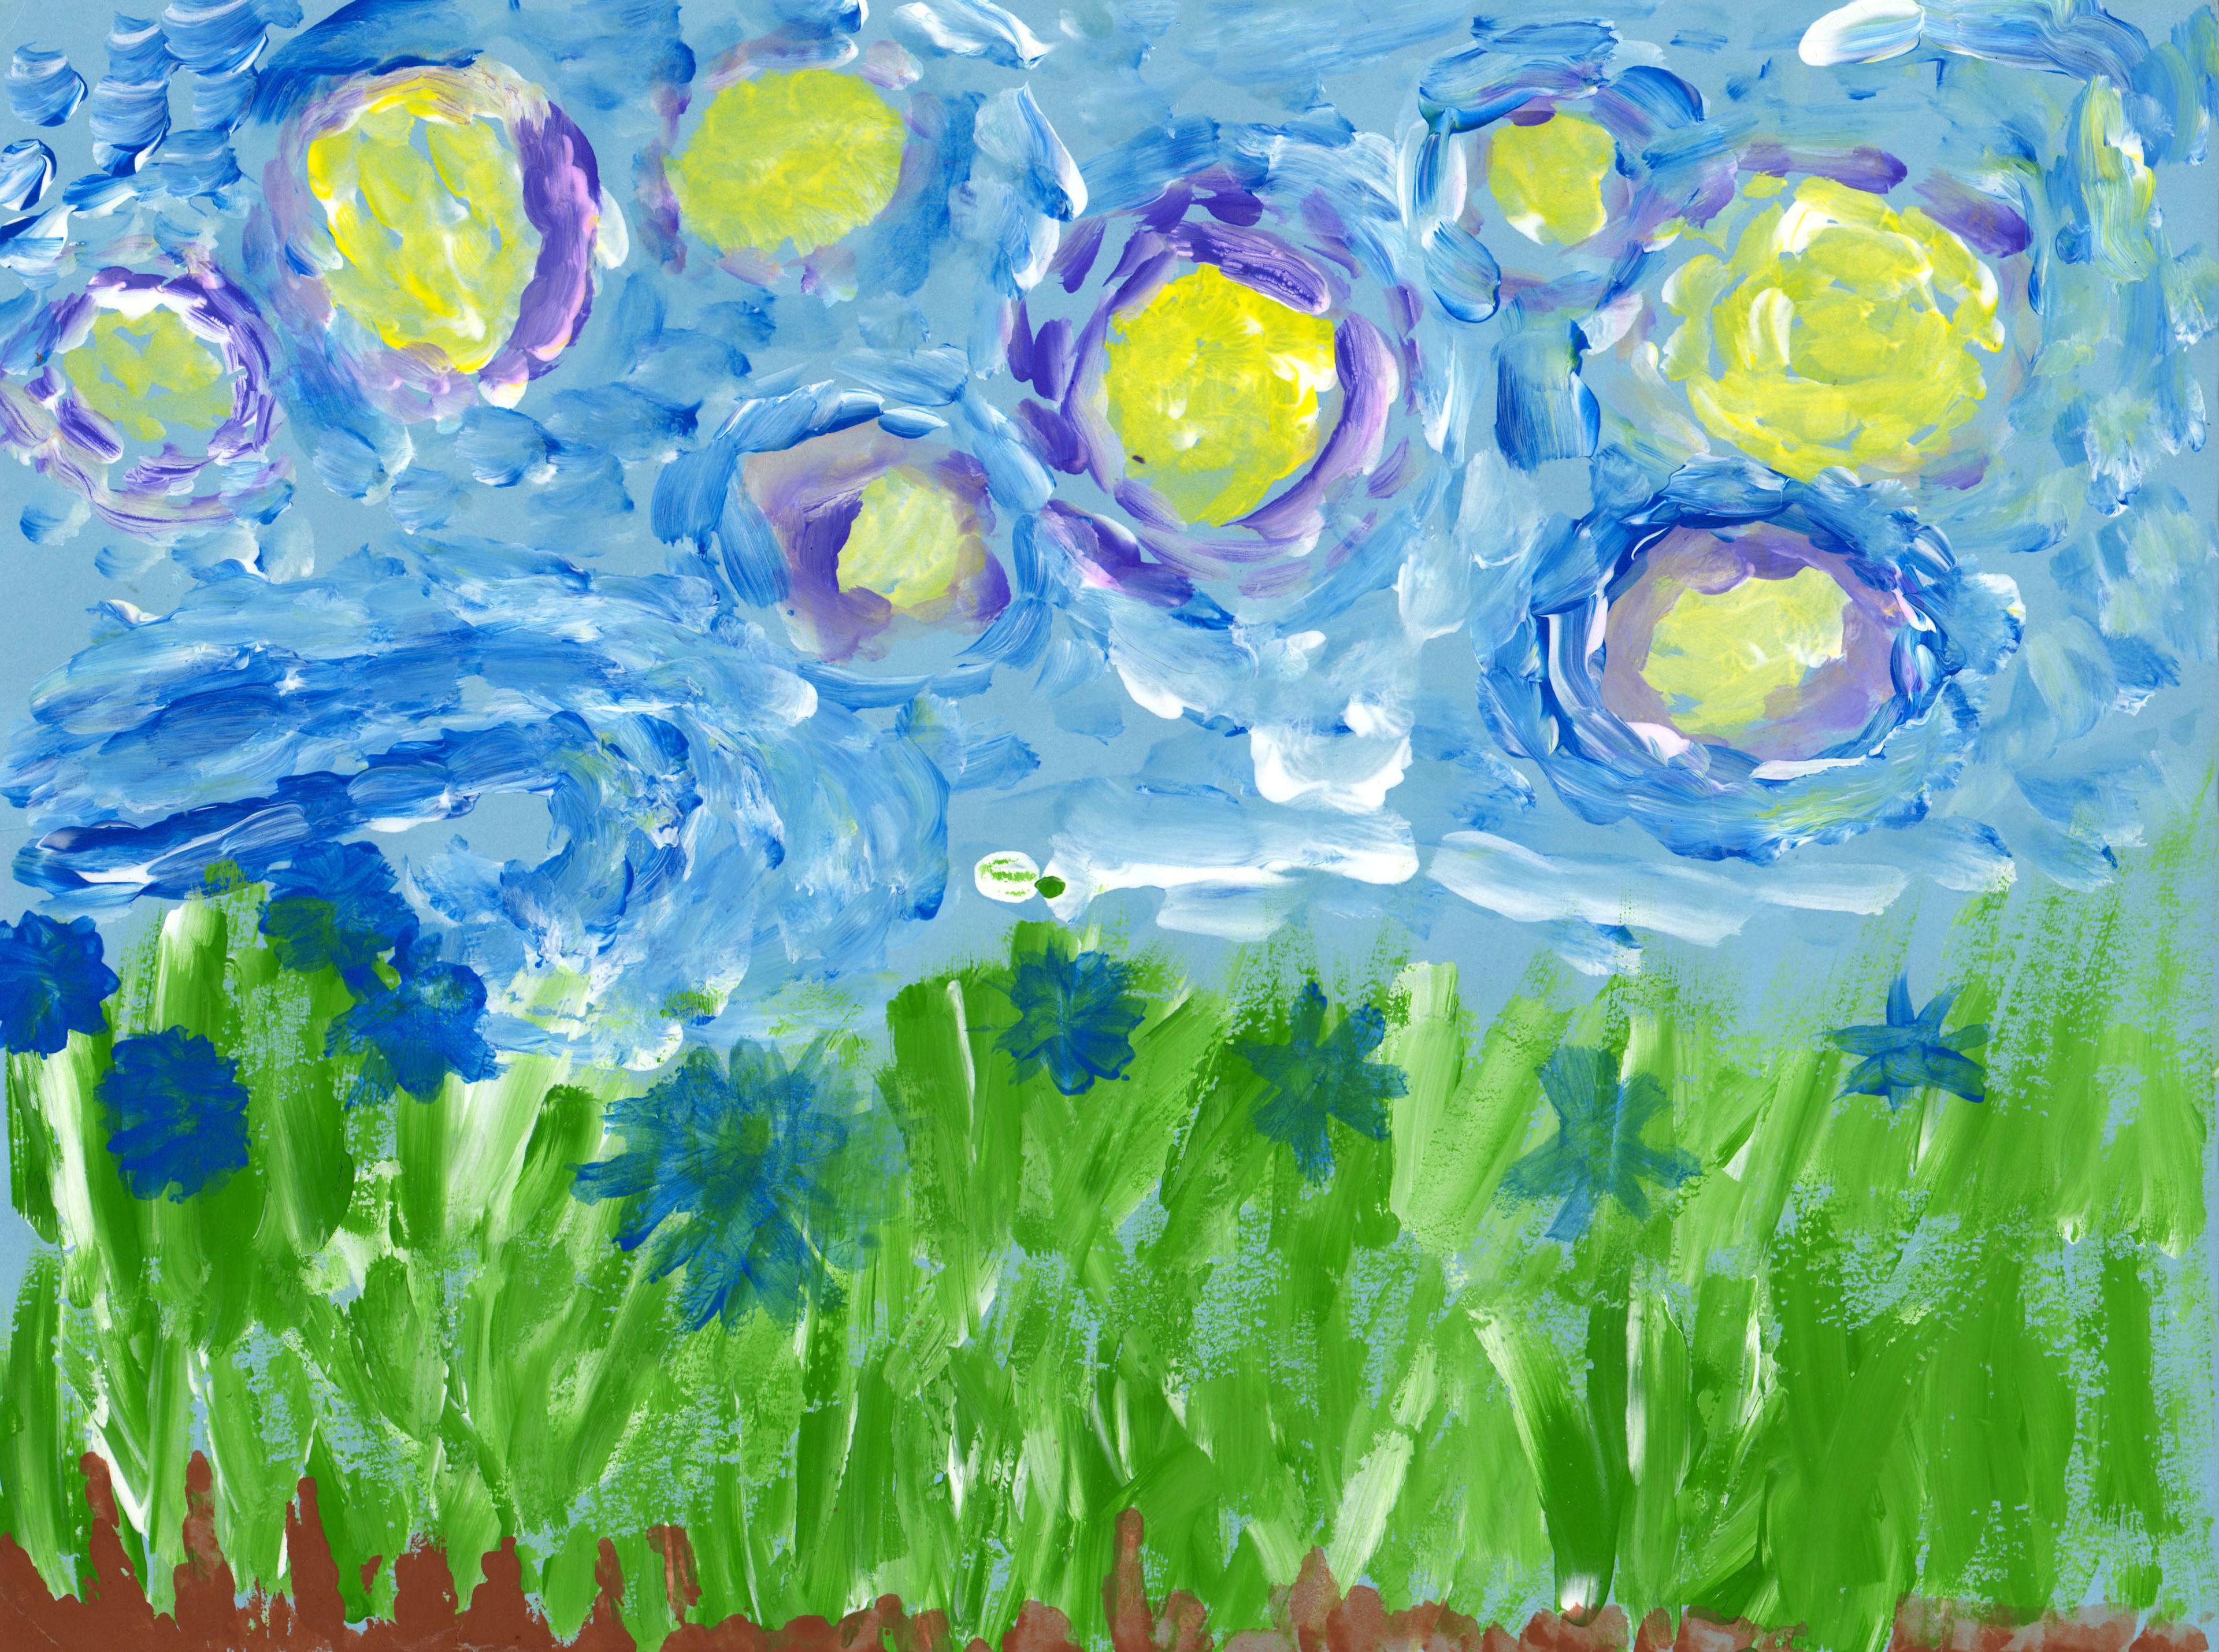 Tempera painting of yellow circles drawn in a blue sky above tall green grass, punctuated with blue flowers above a thin strip of brown soil. The painting is rendered in a style reminiscent of Vincent van Gogh.